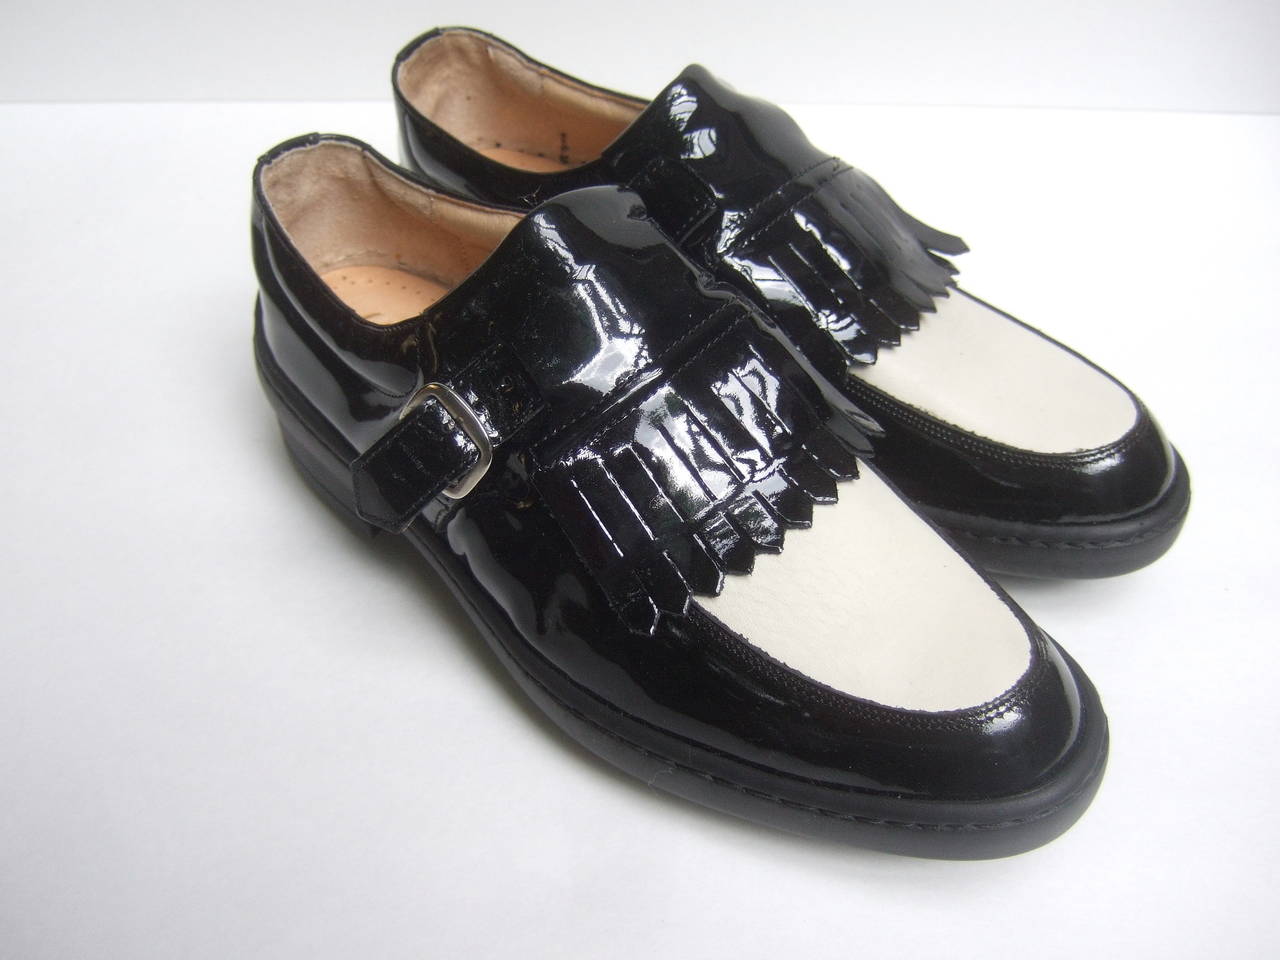 Women's Italian new patent leather brogue golf shoes US Size 7.5
The stylish women's golf shoes are designed with shiny 
patent leather with contrasting white matte leather 

The stylish Italian golf shoes have silver metal buckles
on the